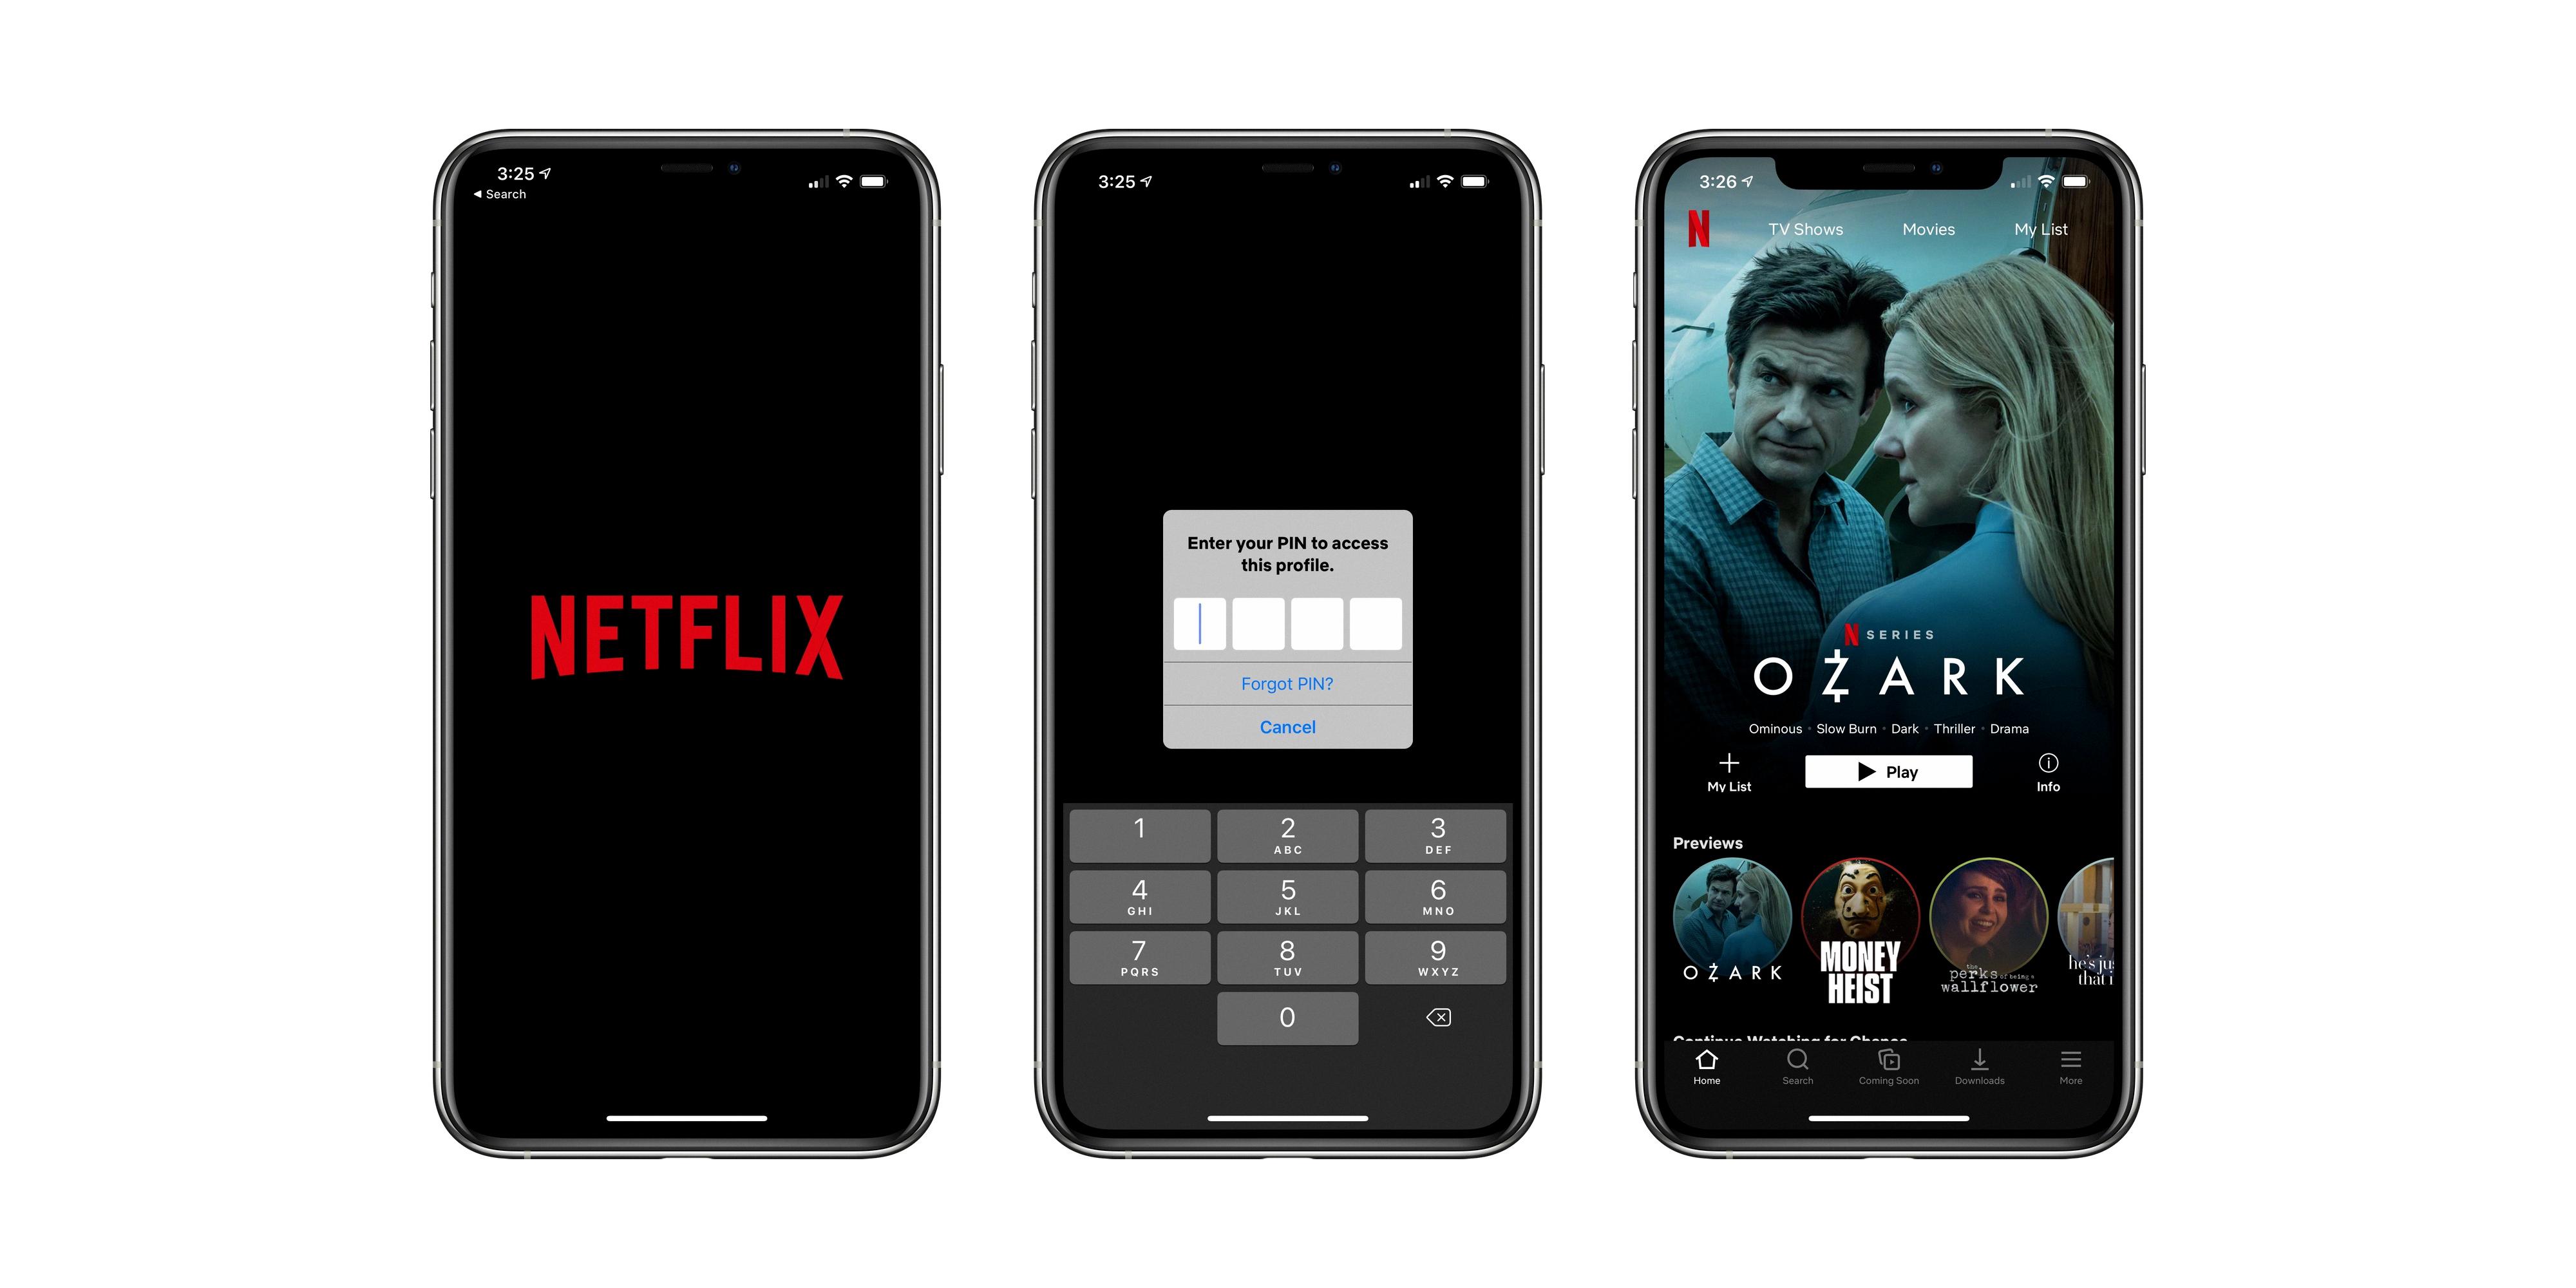 How to Lock Your Netflix Profile On iPhone? 9